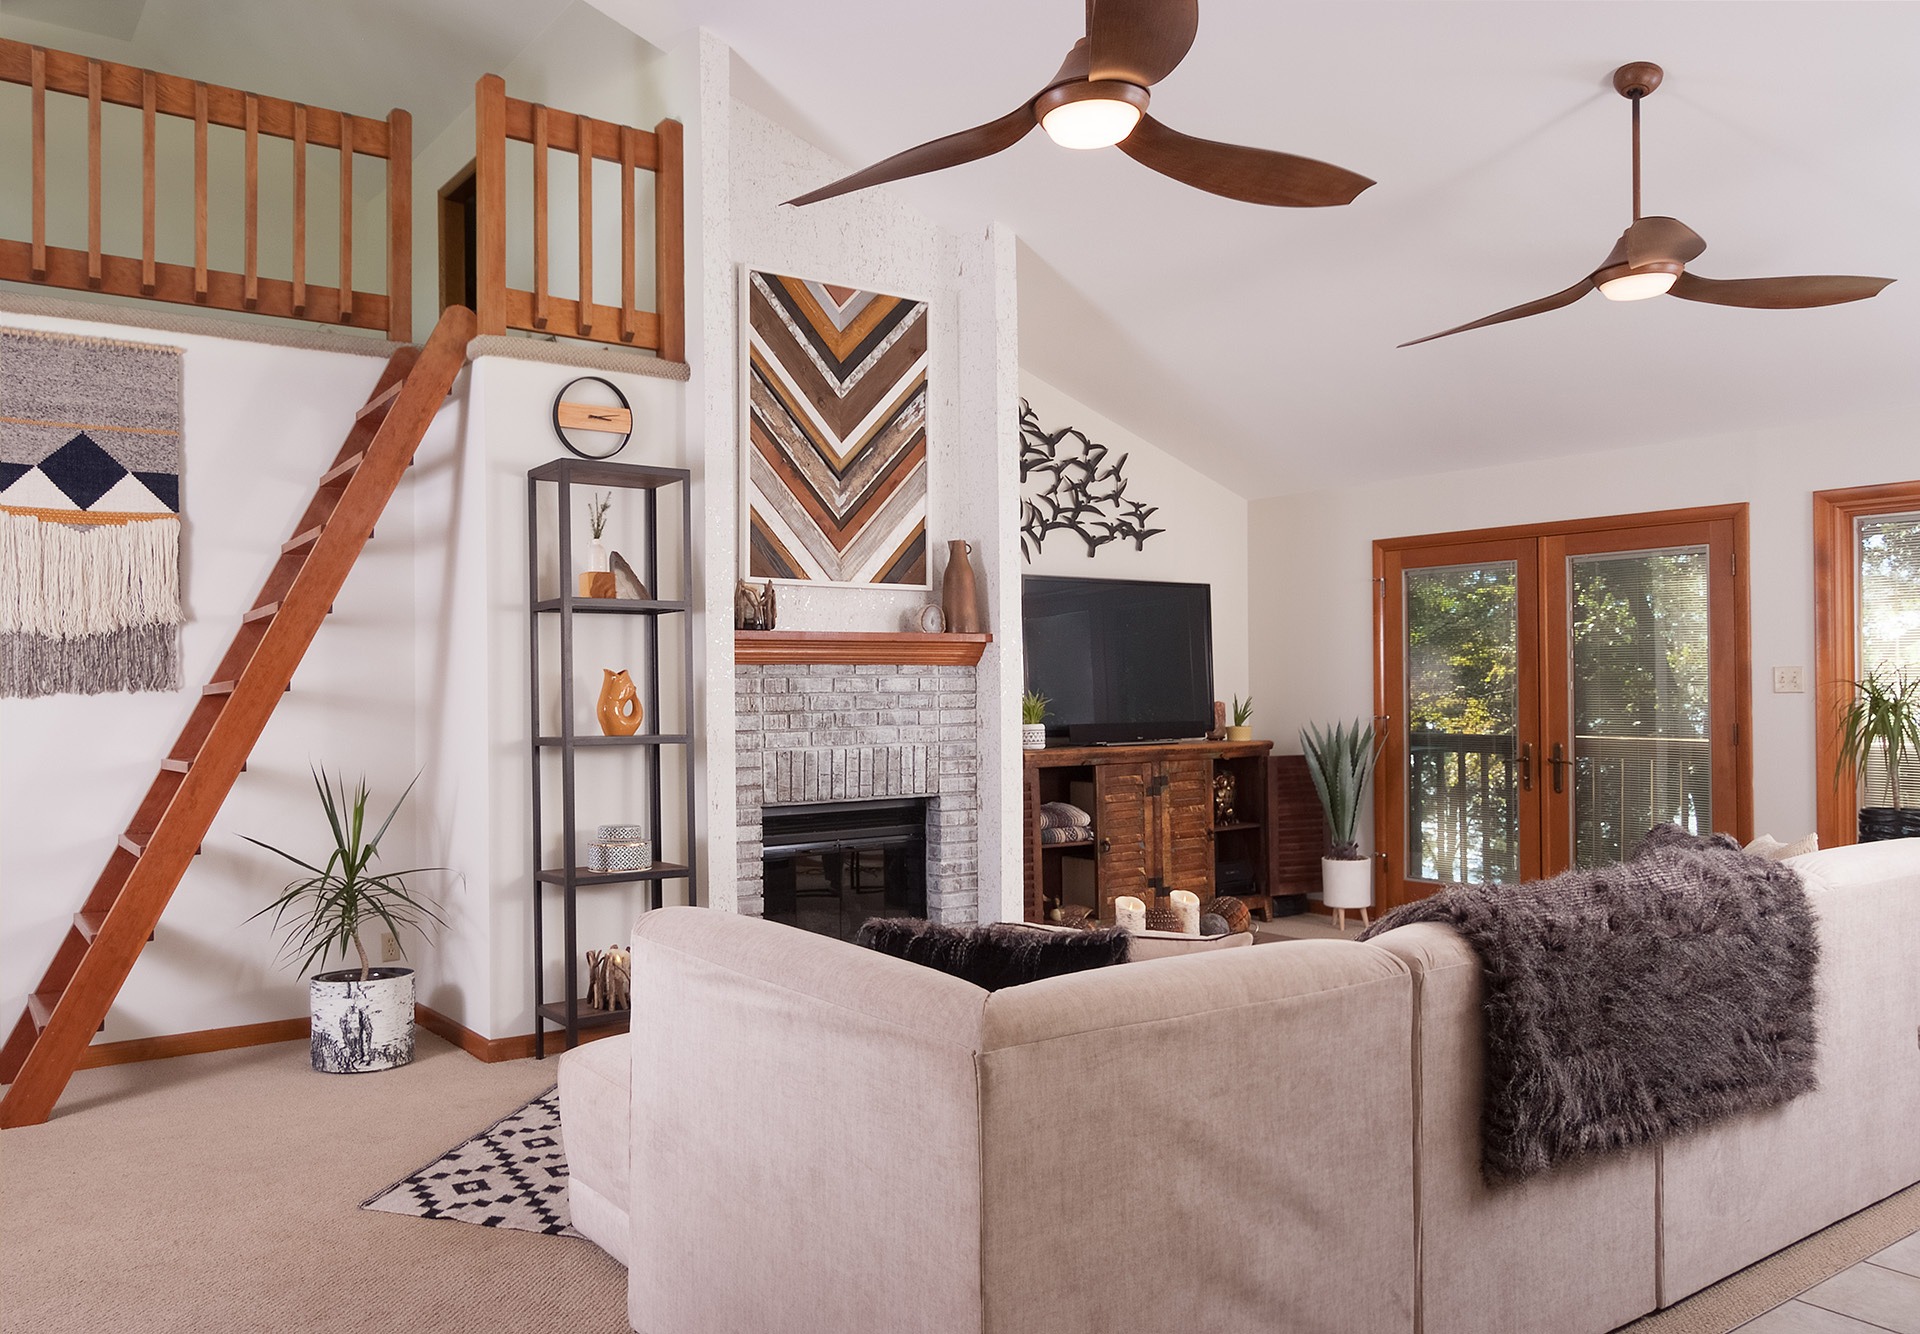 5 ways to make your family room cozy